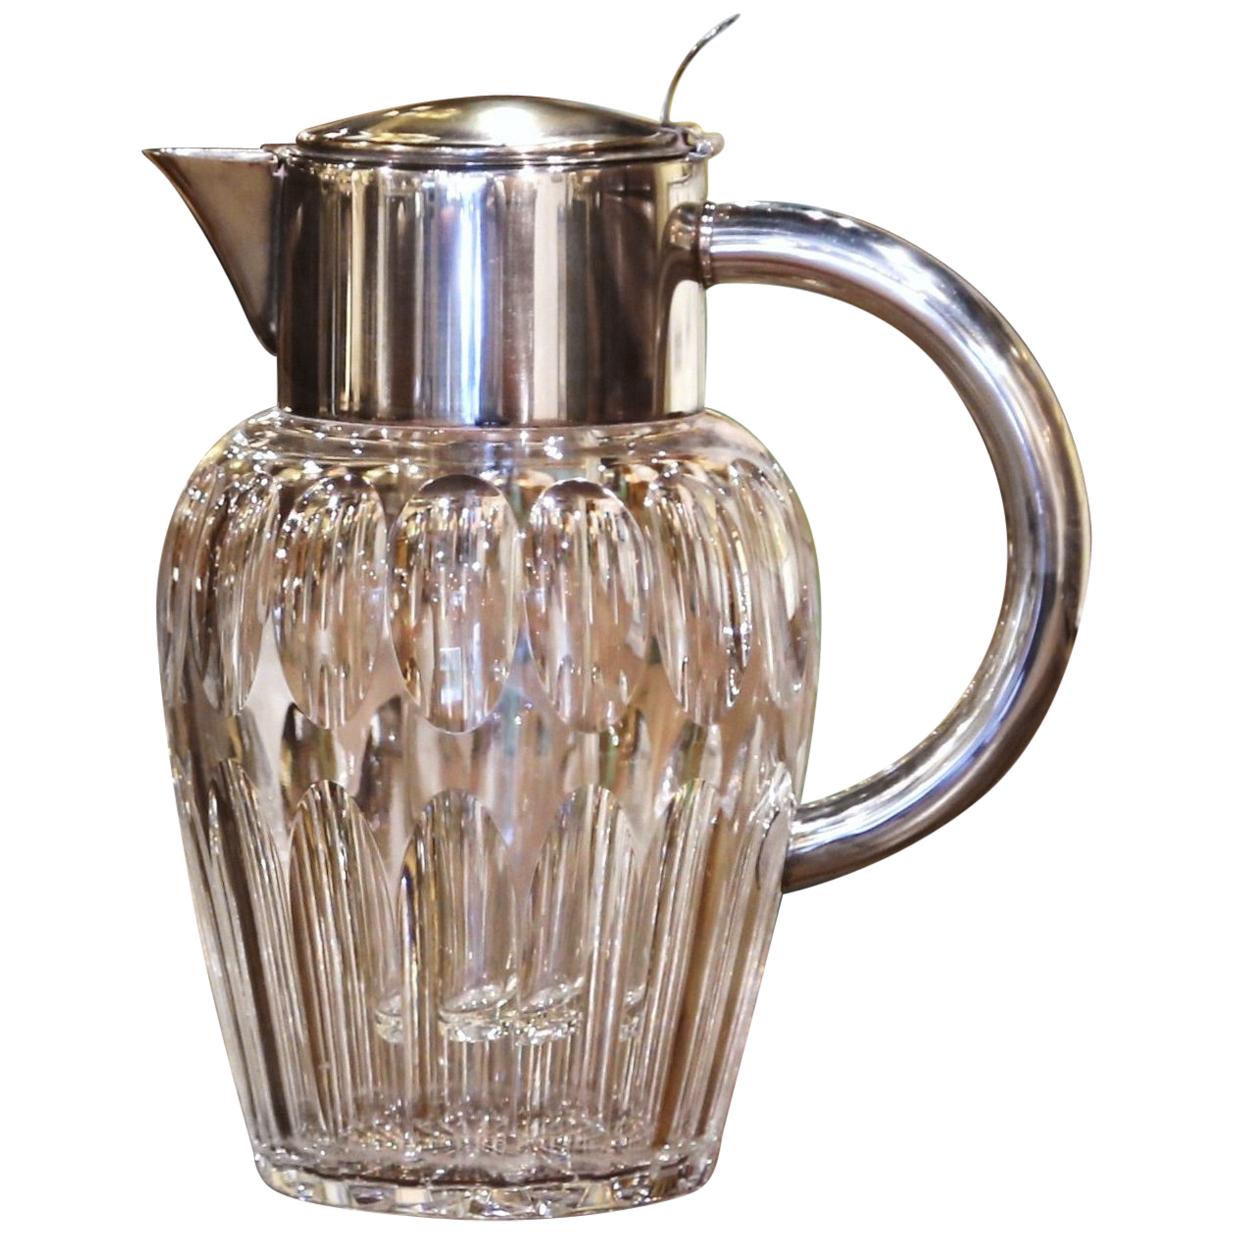 Midcentury French Cut-Glass and Silvered Brass Pitcher with Ice Holder Insert